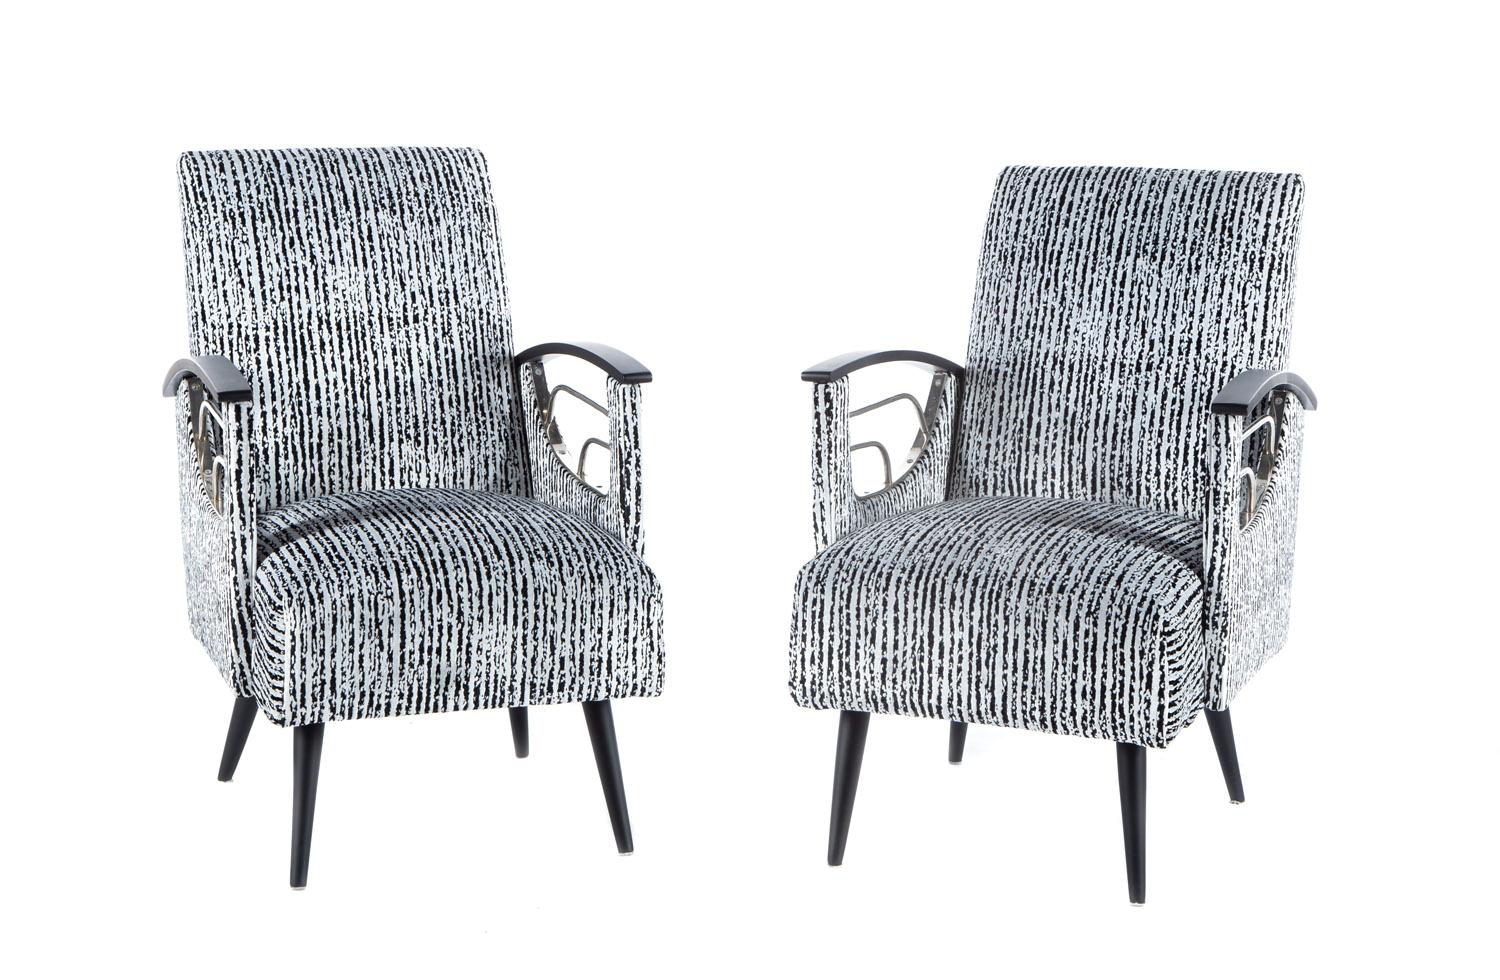 A set of 2 armchairs